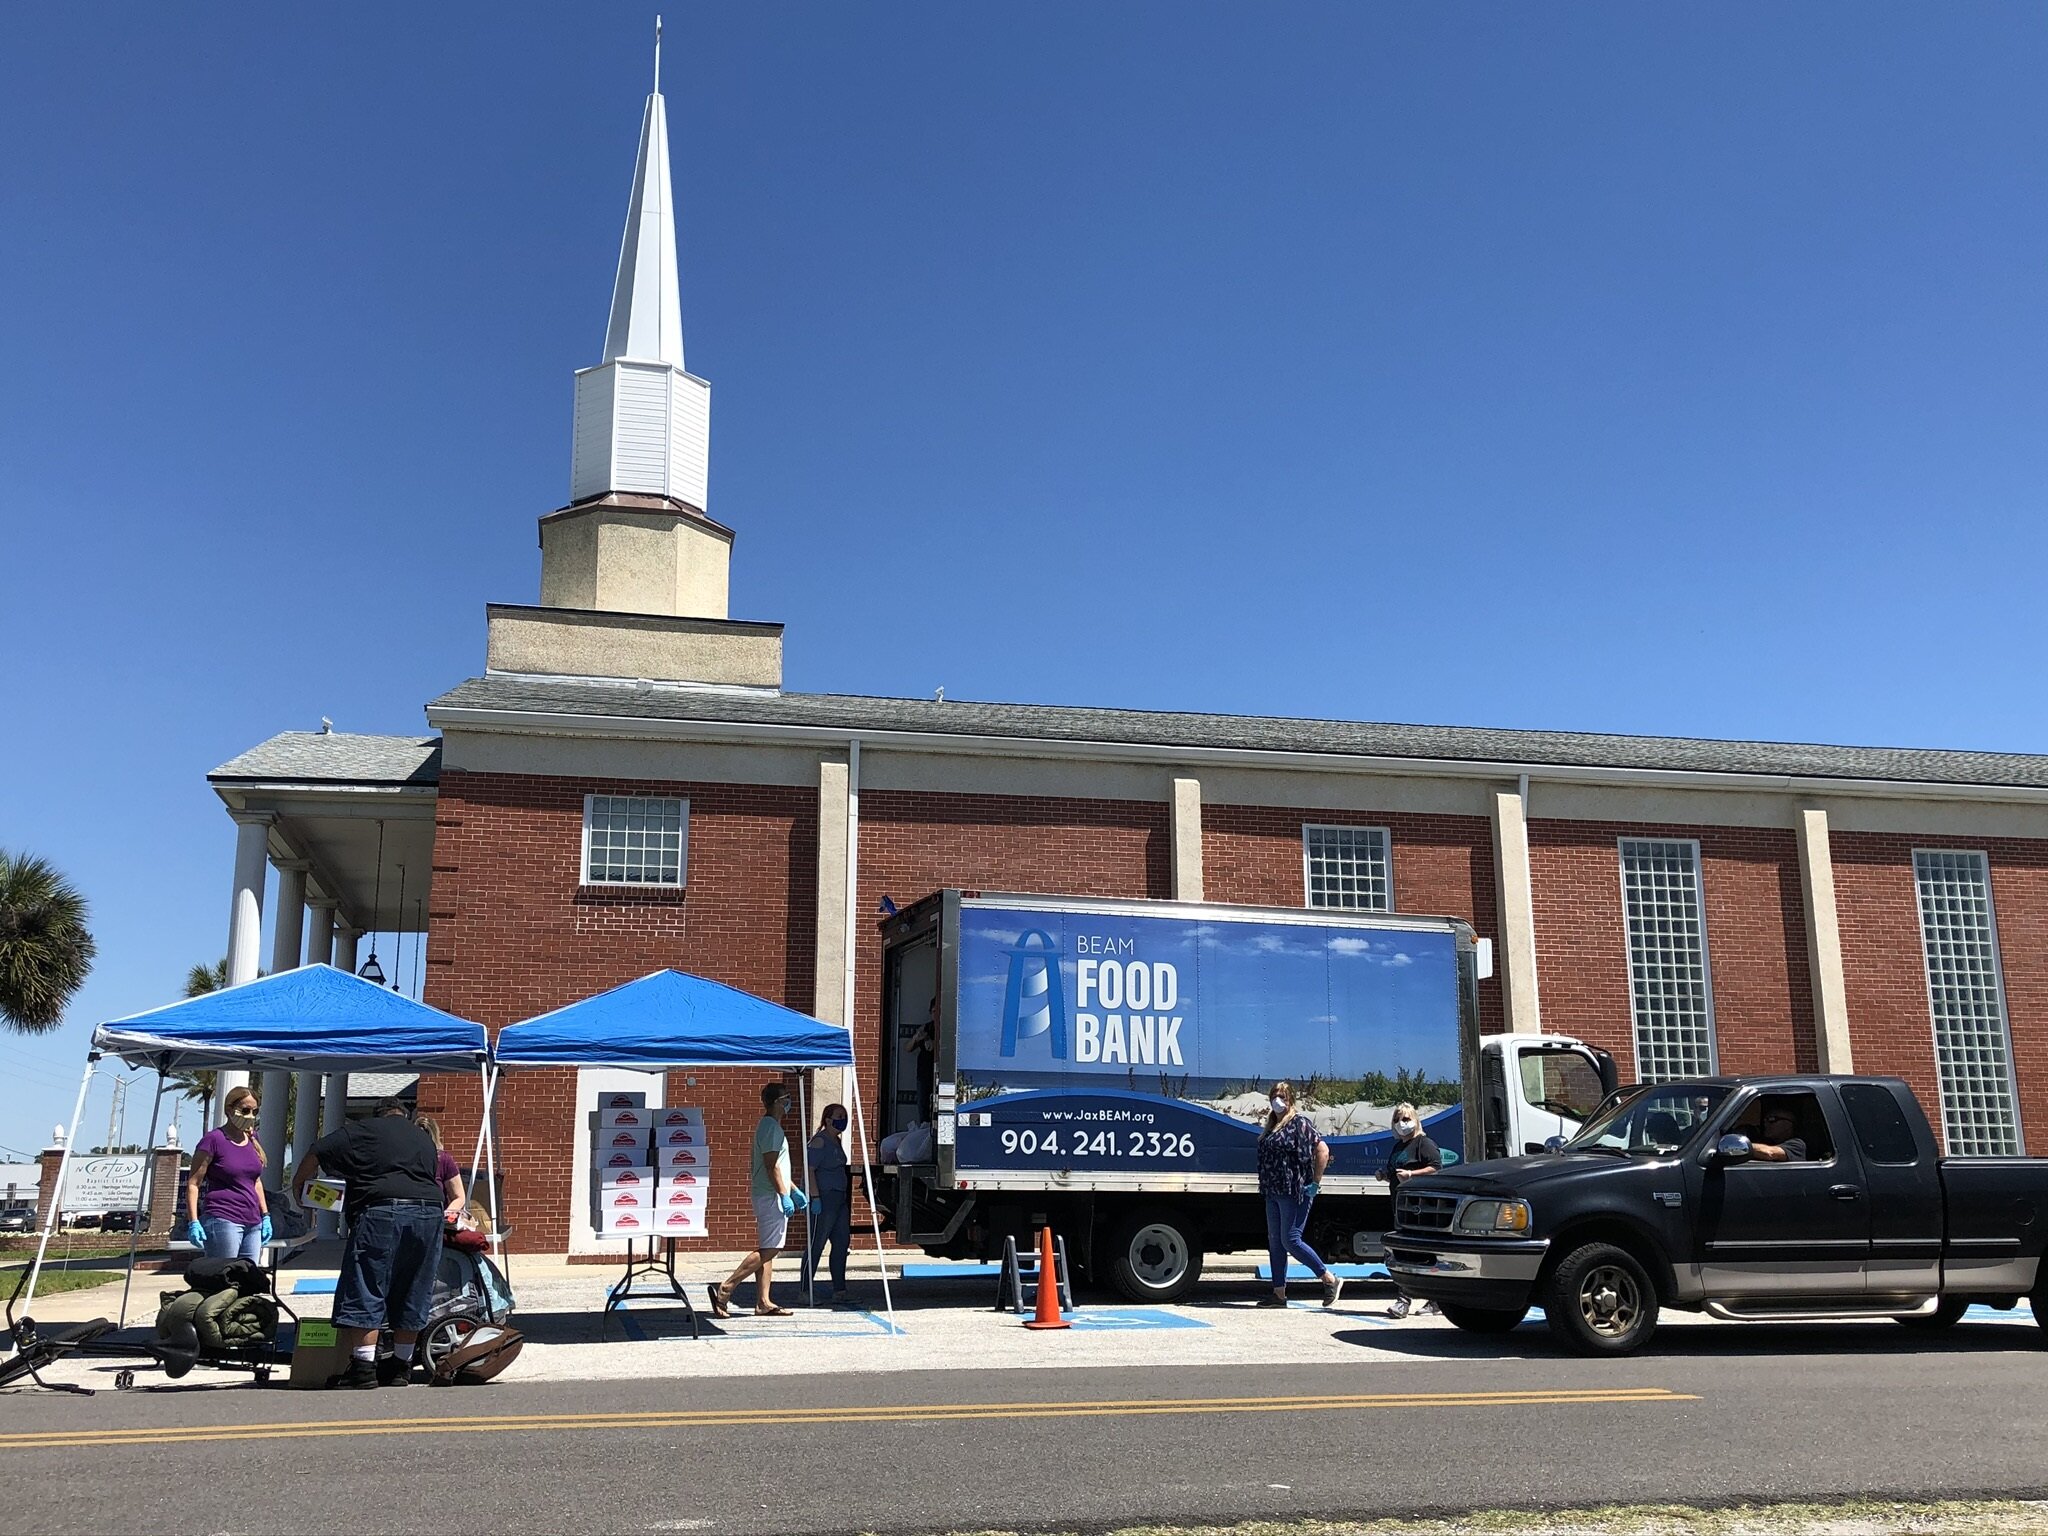 Neptune Baptist Church held their inaugural “Food Share” event on Saturday and provided groceries to 100 beaches families in need.